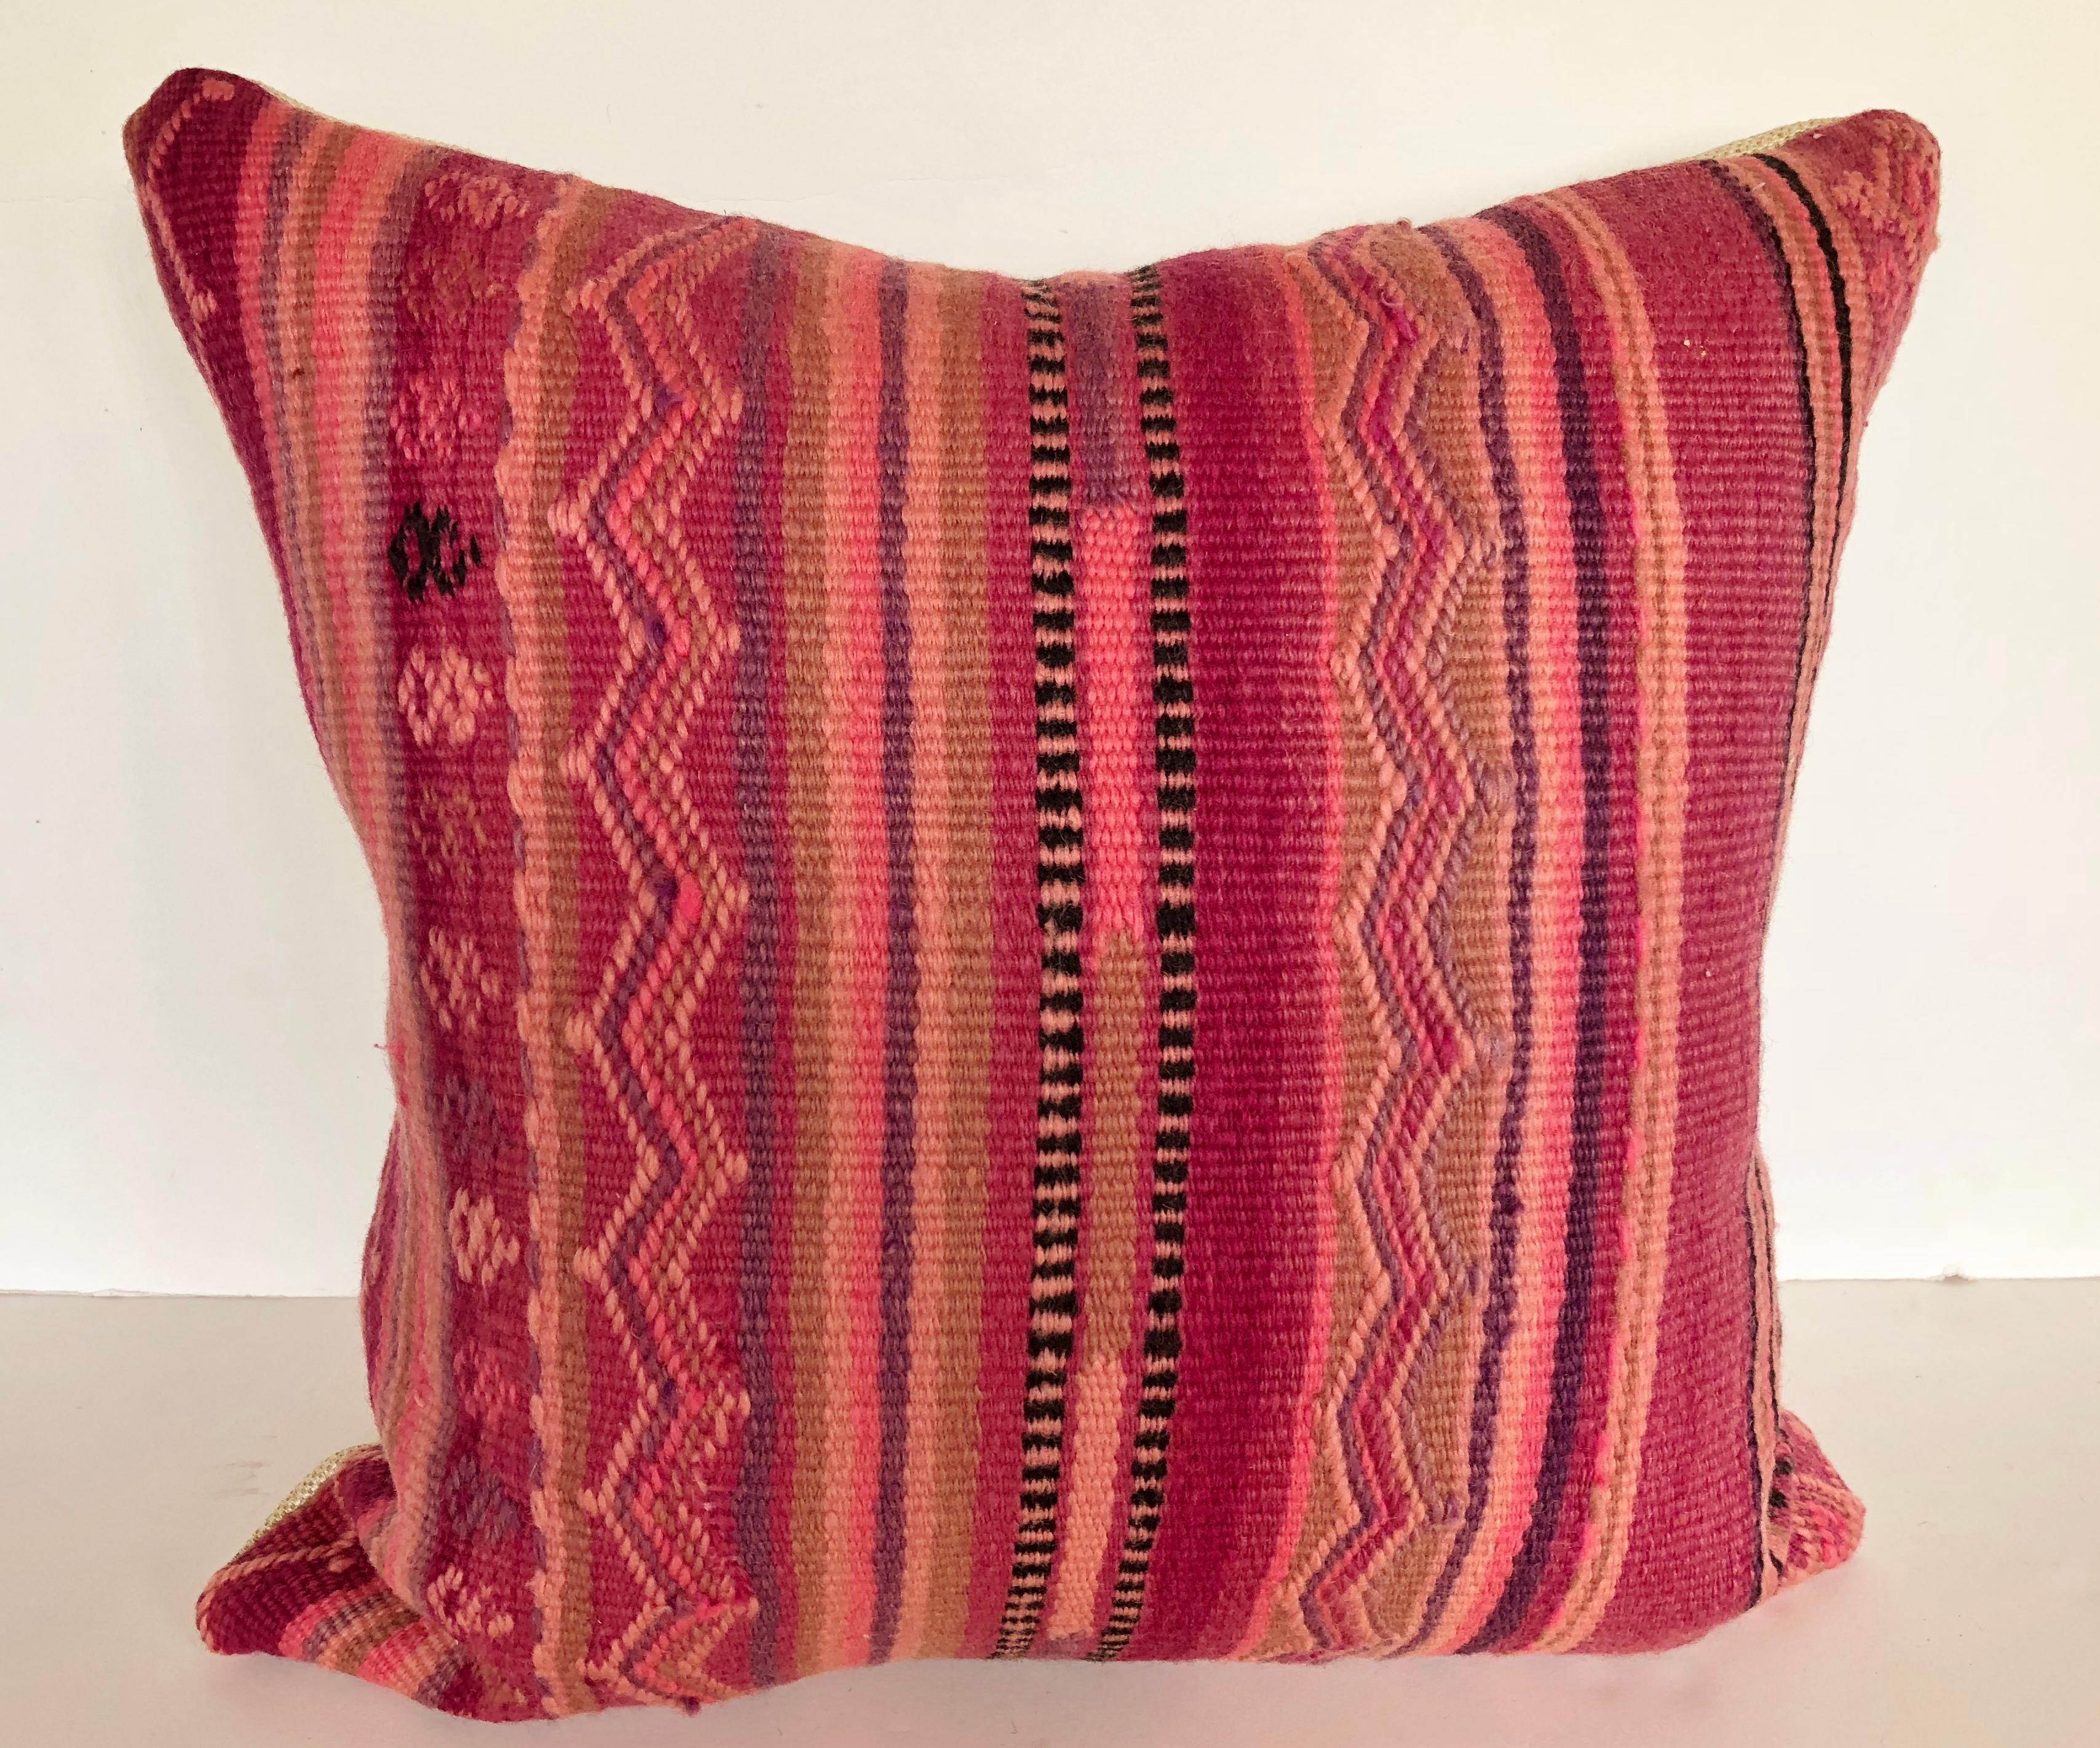 Custom pillow cut from a vintage hand loomed wool Moroccan rug made by the Berber tribes of the Atlas Mountains. Wool is soft and lustrous with natural dyes. The flat-weave stripes are embellished with embroidered tribal designs. Pillow is backed in